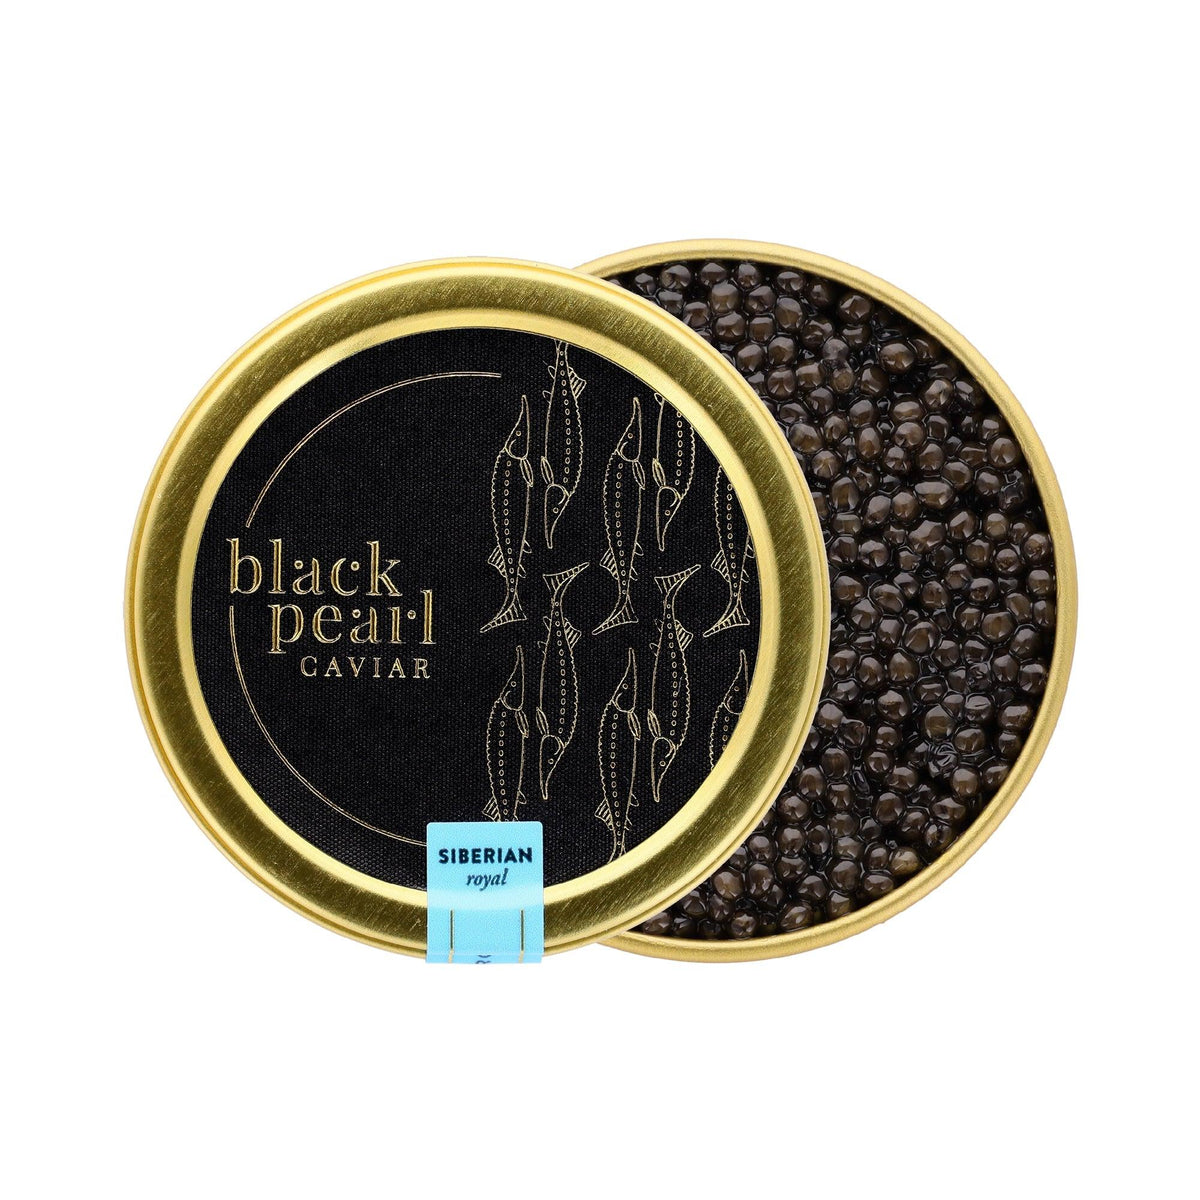 medium dark to green caviar, strong flavors, clean taste, one of our best-seller